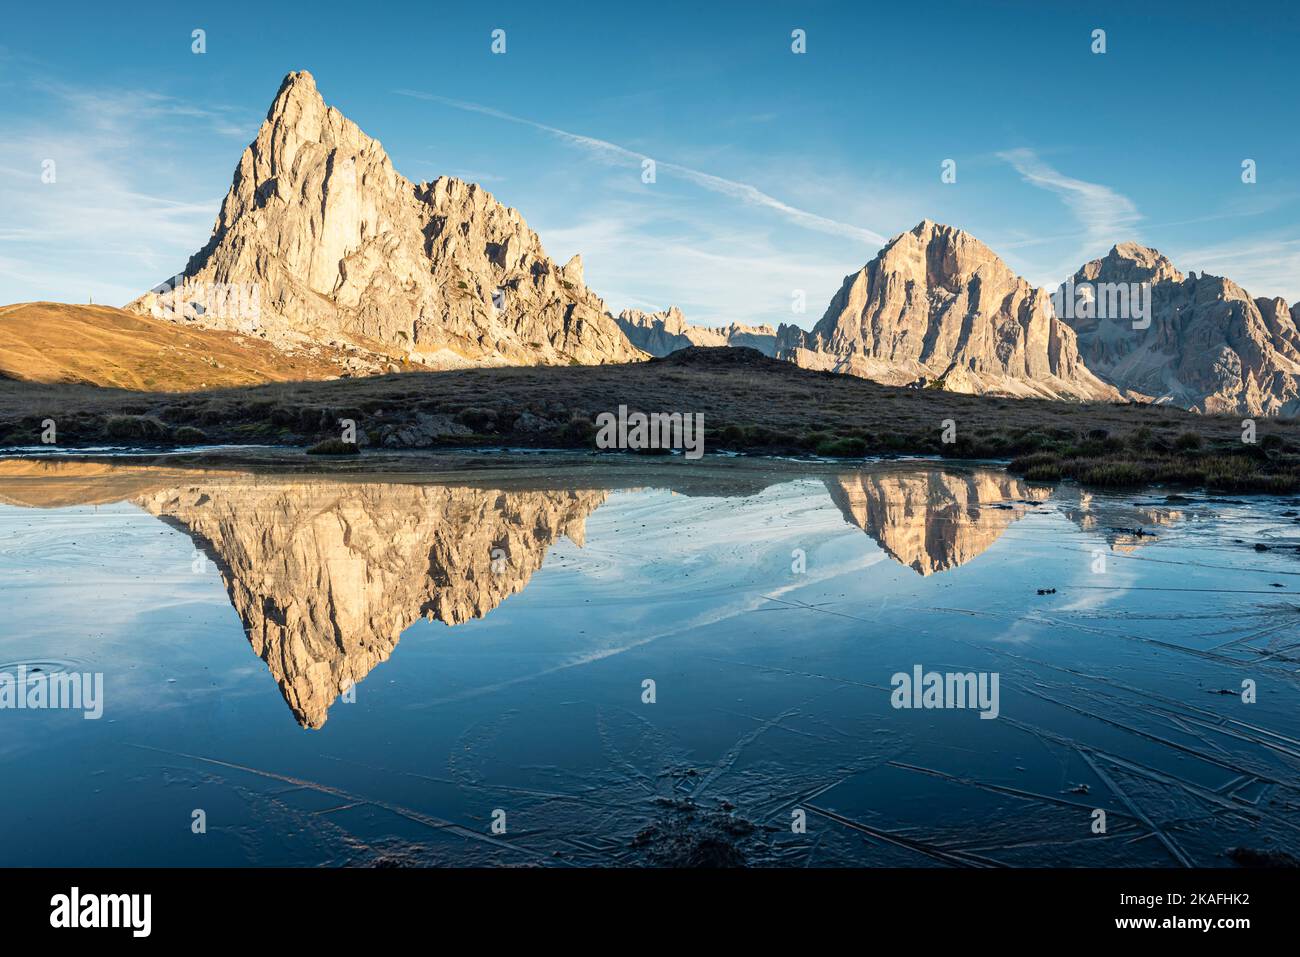 The Ra Gusela and Tofane di Rozes mountains reflected in the water and ice of a lake on a frosty autumn morning at Passo di Giau, Dolomites, Italy Stock Photo